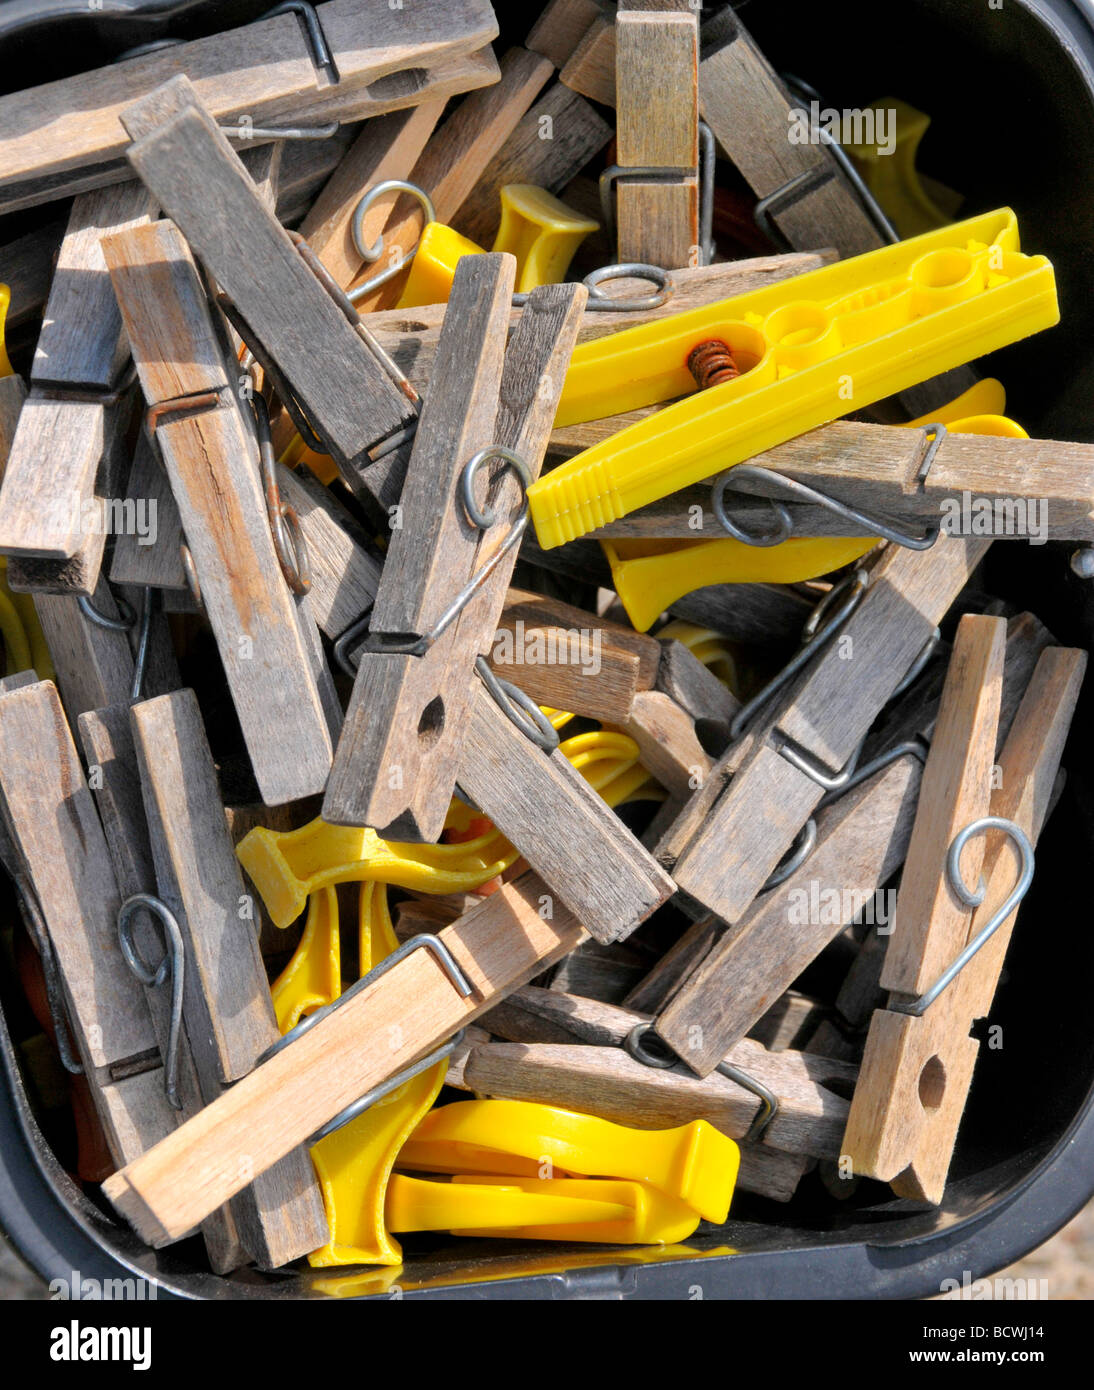 A plastic tub of wooden and plastic clothes pegs. Stock Photo